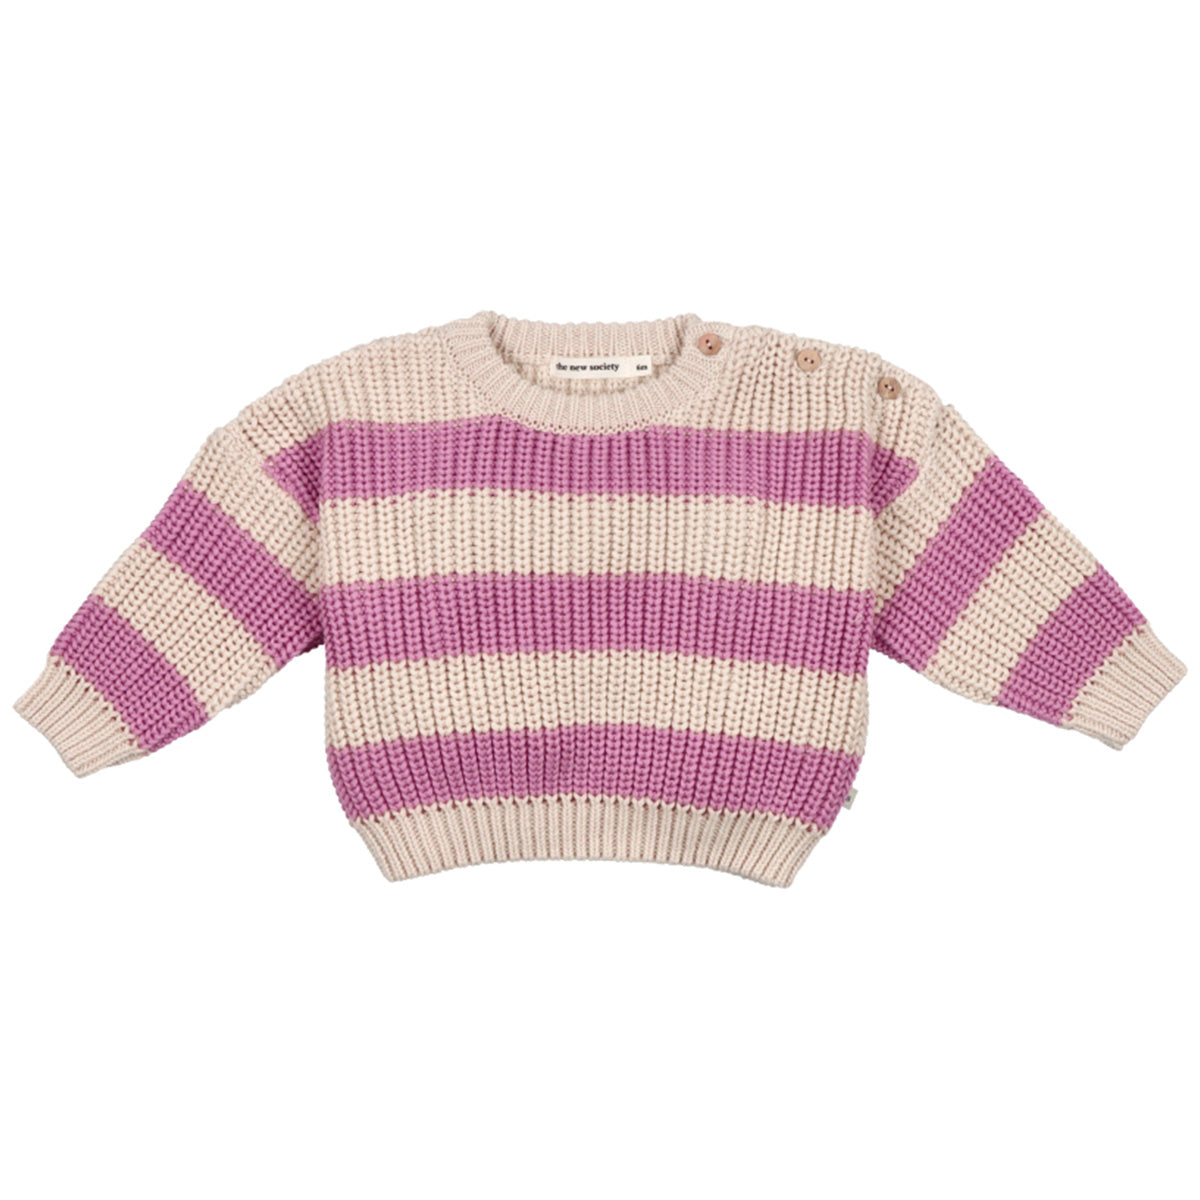 The Myra Baby Jumper Natural And Iris Lilac Stripes from The New Society. This slightly oversized piece boasts a relaxed